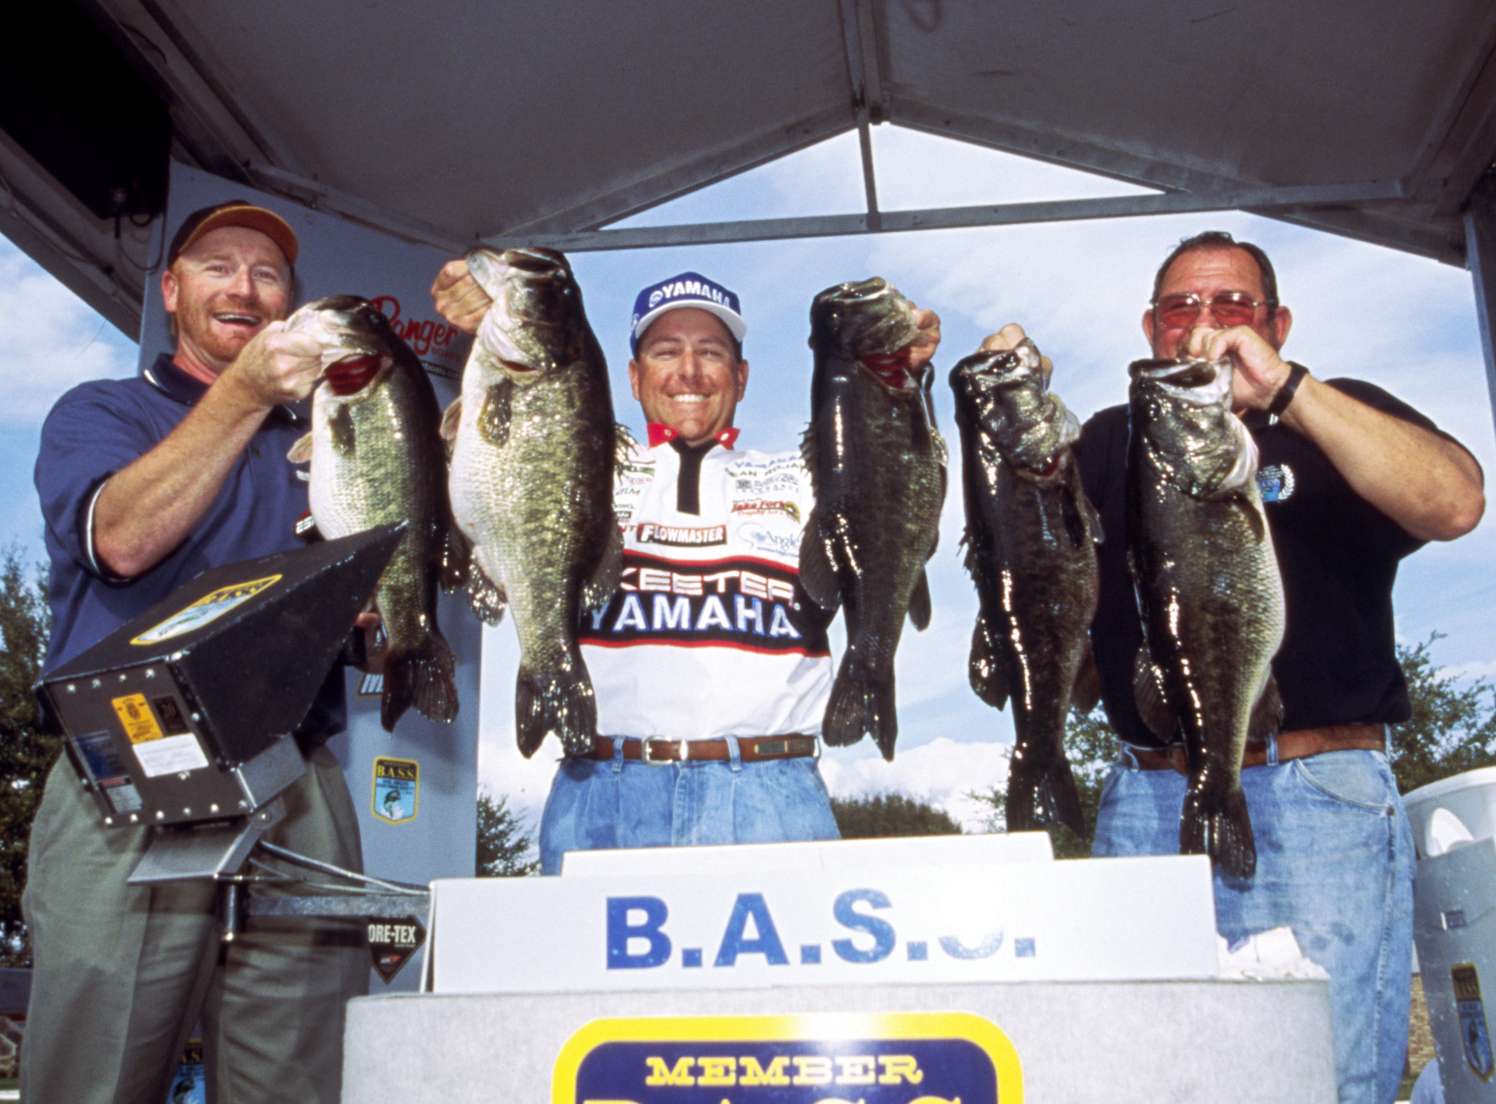 Heaviest Single-Day Weight (five-bass limit): Dean Rojas, 45-2
Maybe one of B.A.S.S.'s most well-known records, Dean Rojas has the honor of being the angler who brought in the heaviest bag ever. It was Jan. 17, 2001, the first day of the Florida Bassmaster Top 150 on the Kissimmee Chain and Lake Toho. He weighed in five monsters for a total of 45 pounds, 2 ounces. He went on to win the tournament, passing the century mark and ending with 108-12. The closest angler behind him was Mark Davis with 93-1, and Davis caught the second-heaviest bag ever the very next day with 41-10. Davis' runner-up spot slipped when the pros went to Texas' Falcon Lake in 2008, and three anglers â Terry Scroggins, Aaron Martens and Byron Velvick â caught 40-plus sacks. Scroggins now owns the second-heaviest bag with 44-4.
